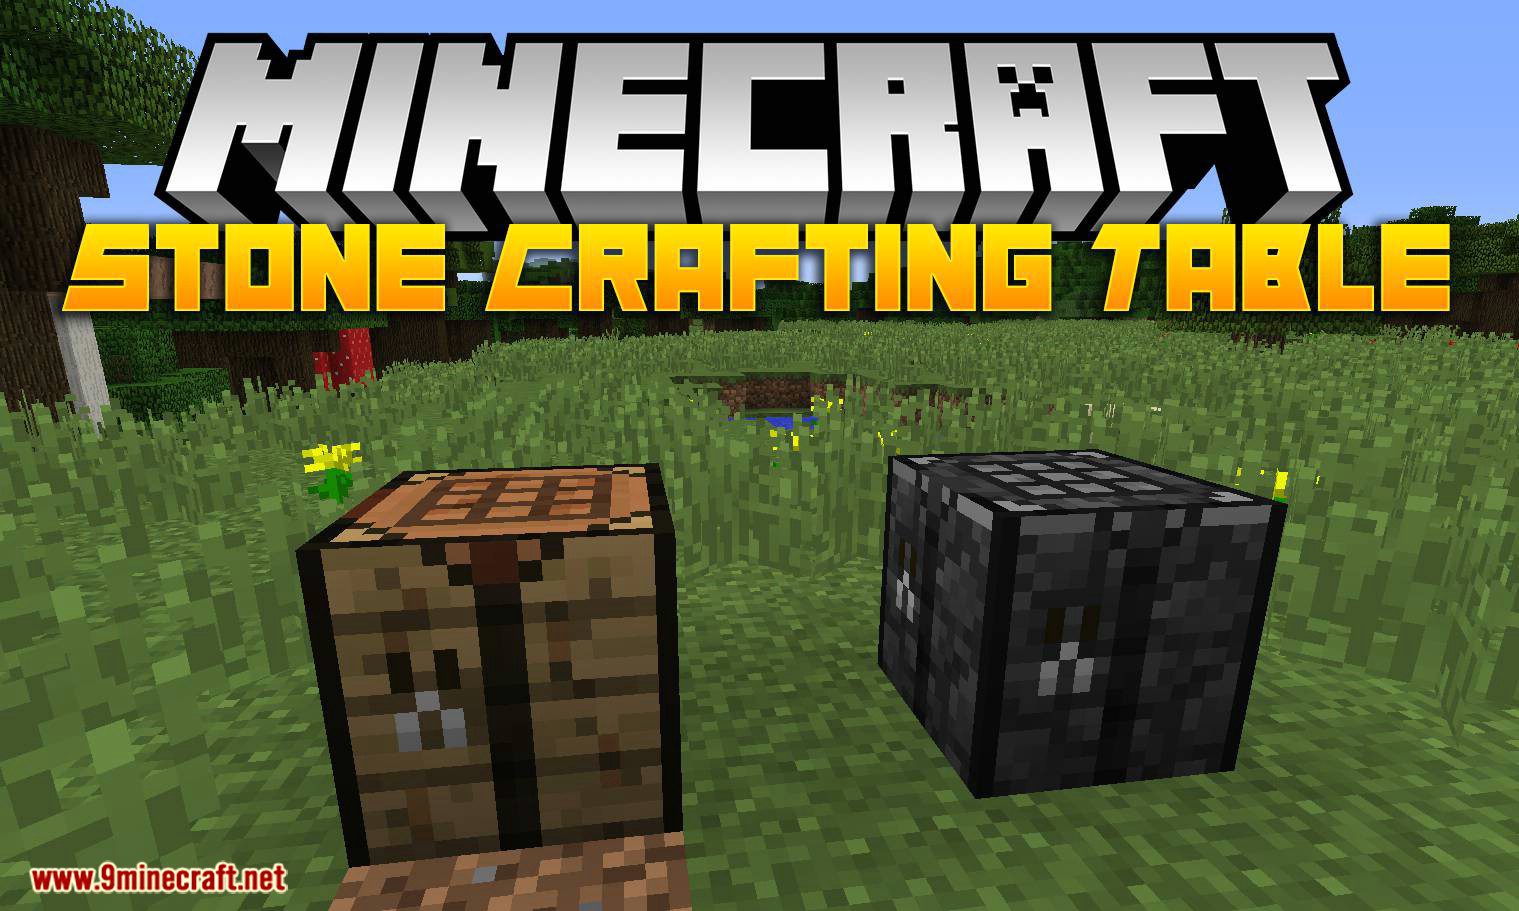 Stone Crafting Table Mod 277.277277.277/277.27727.27 (Stone Version of the